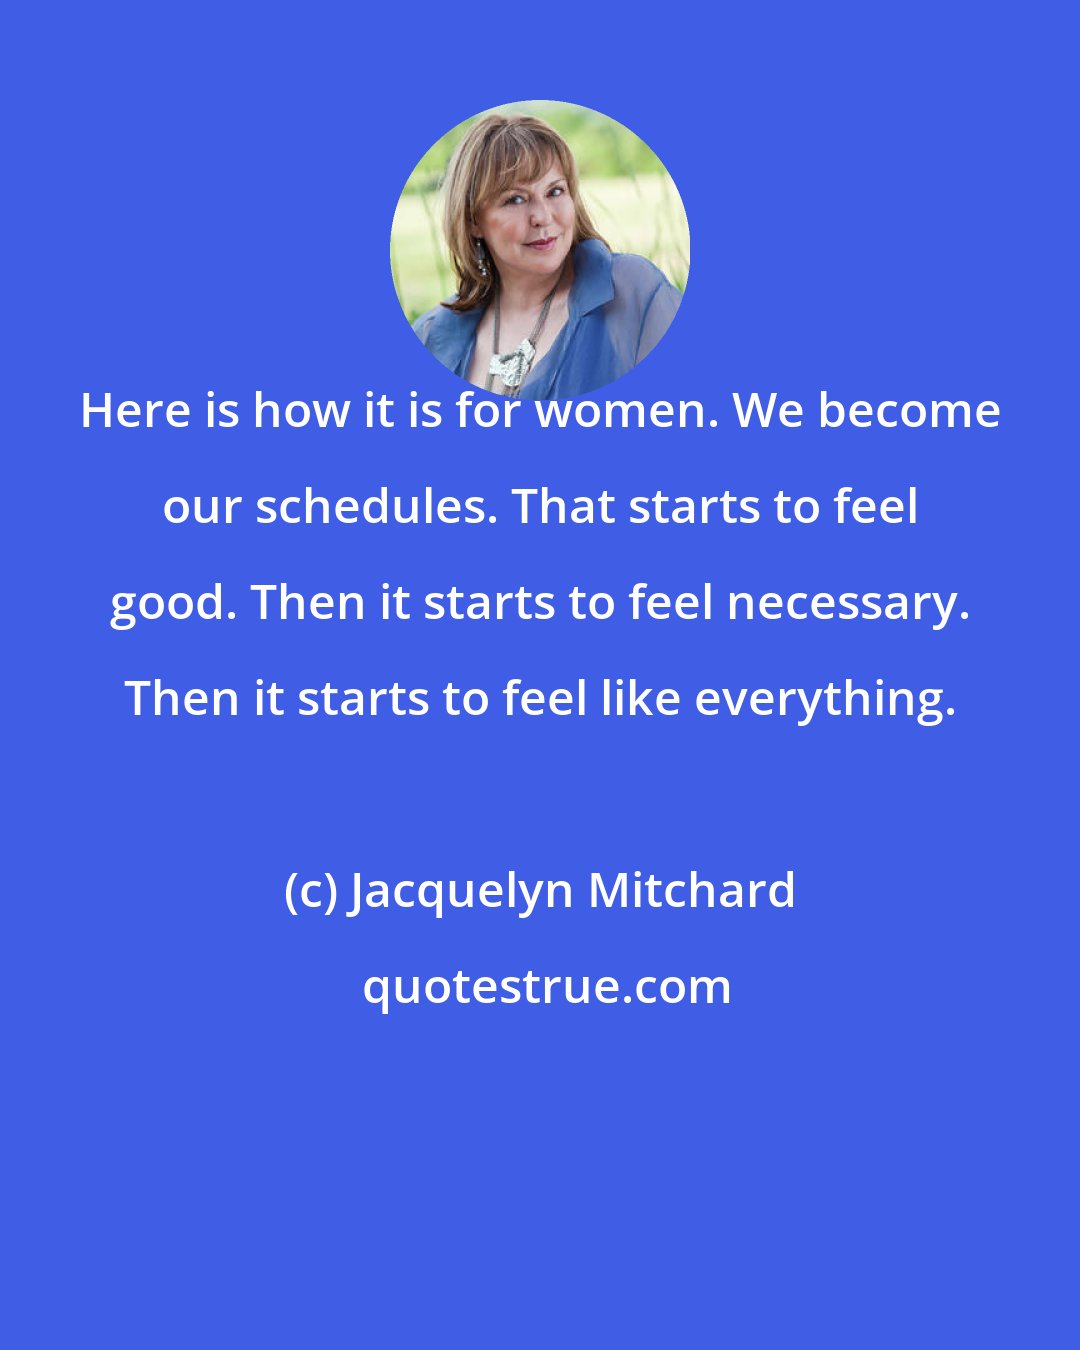 Jacquelyn Mitchard: Here is how it is for women. We become our schedules. That starts to feel good. Then it starts to feel necessary. Then it starts to feel like everything.